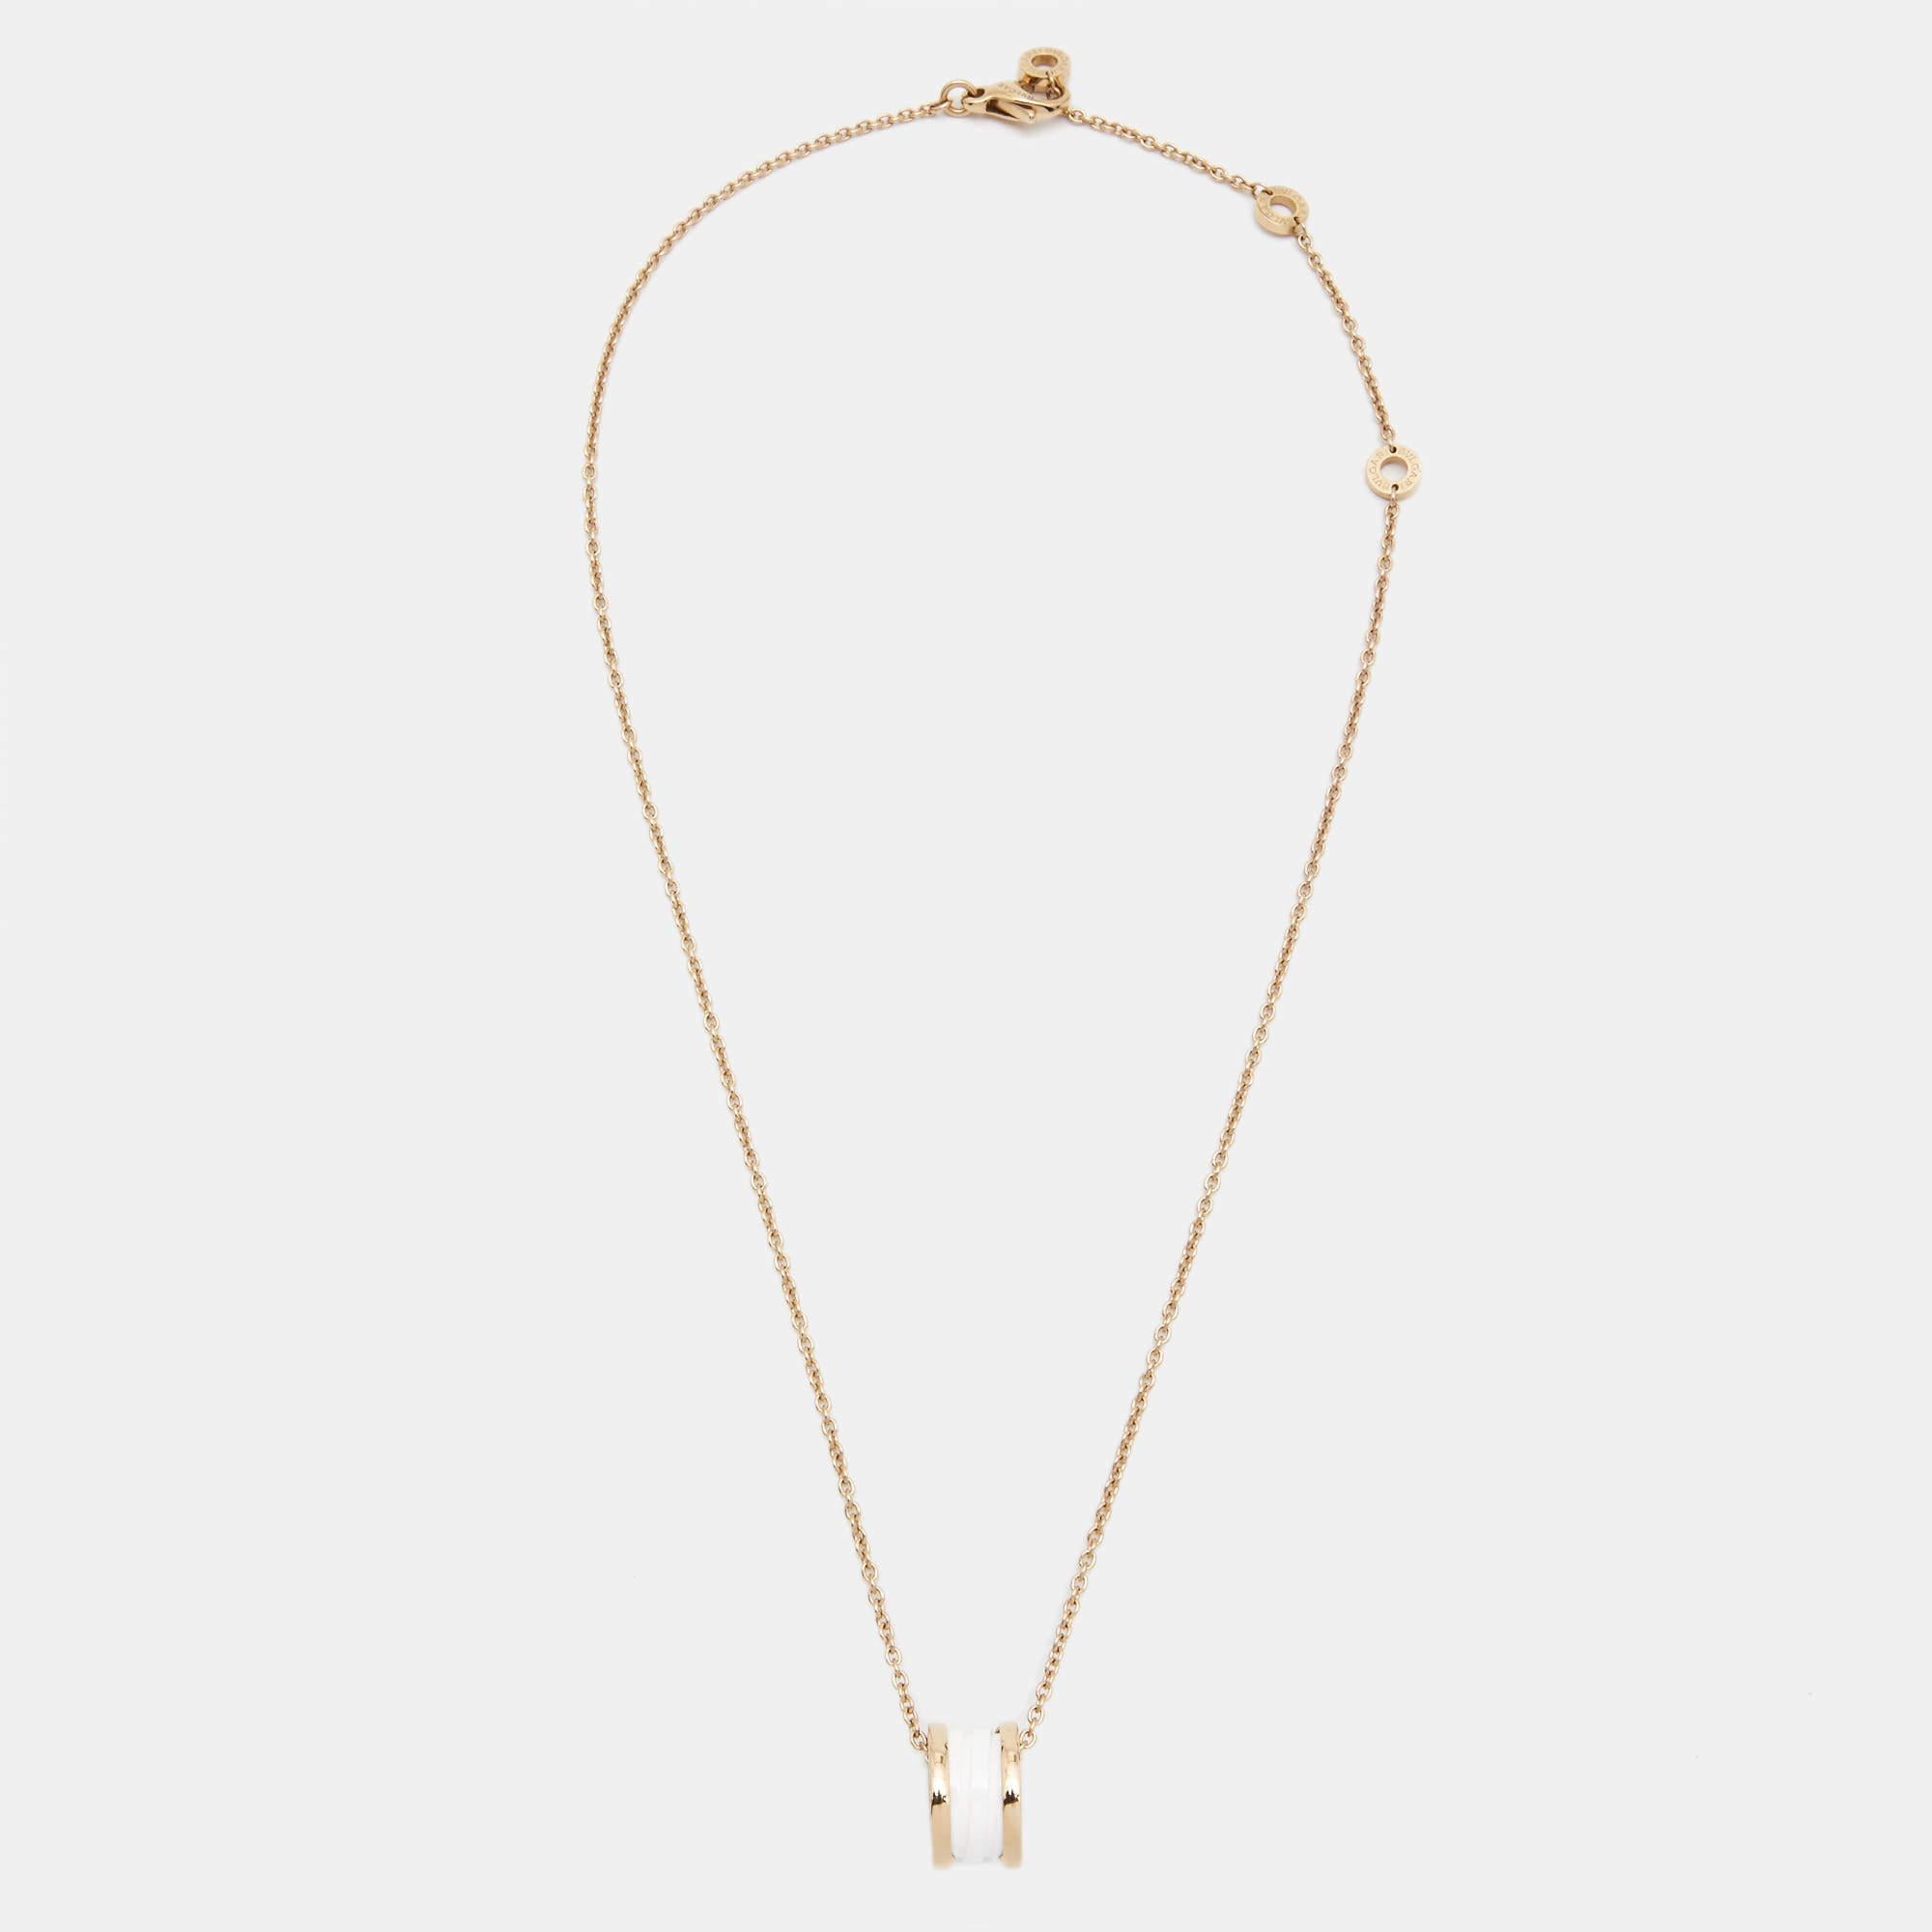 Define your neck with this 18k rose gold necklace from Bvlgari's B.Zero1 collection. It is a masterfully crafted creation that promises to hold its beauty and value for a long time.

